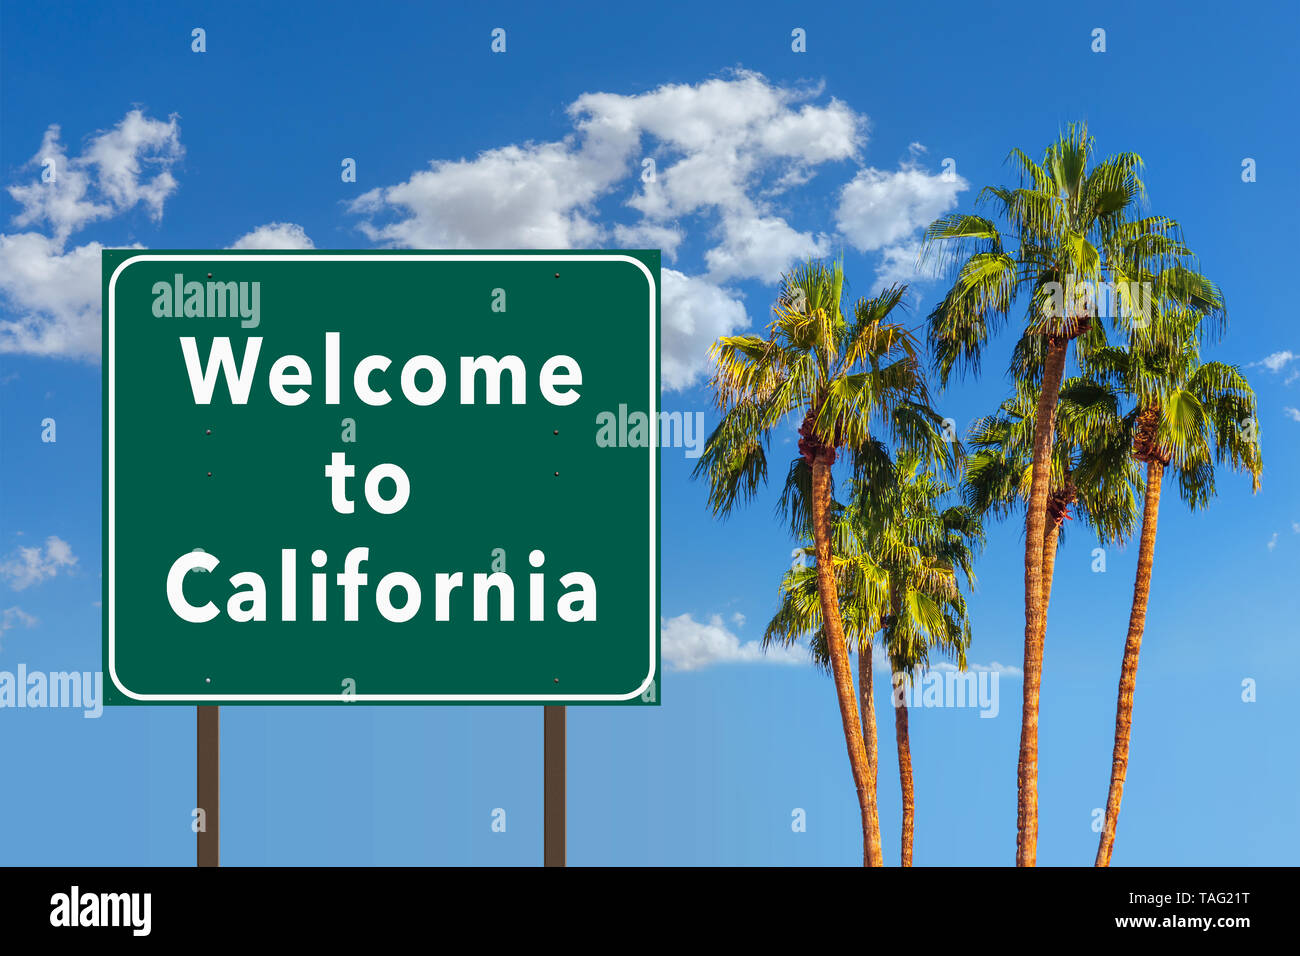 Welcome to California road sign with palm trees Stock Photo